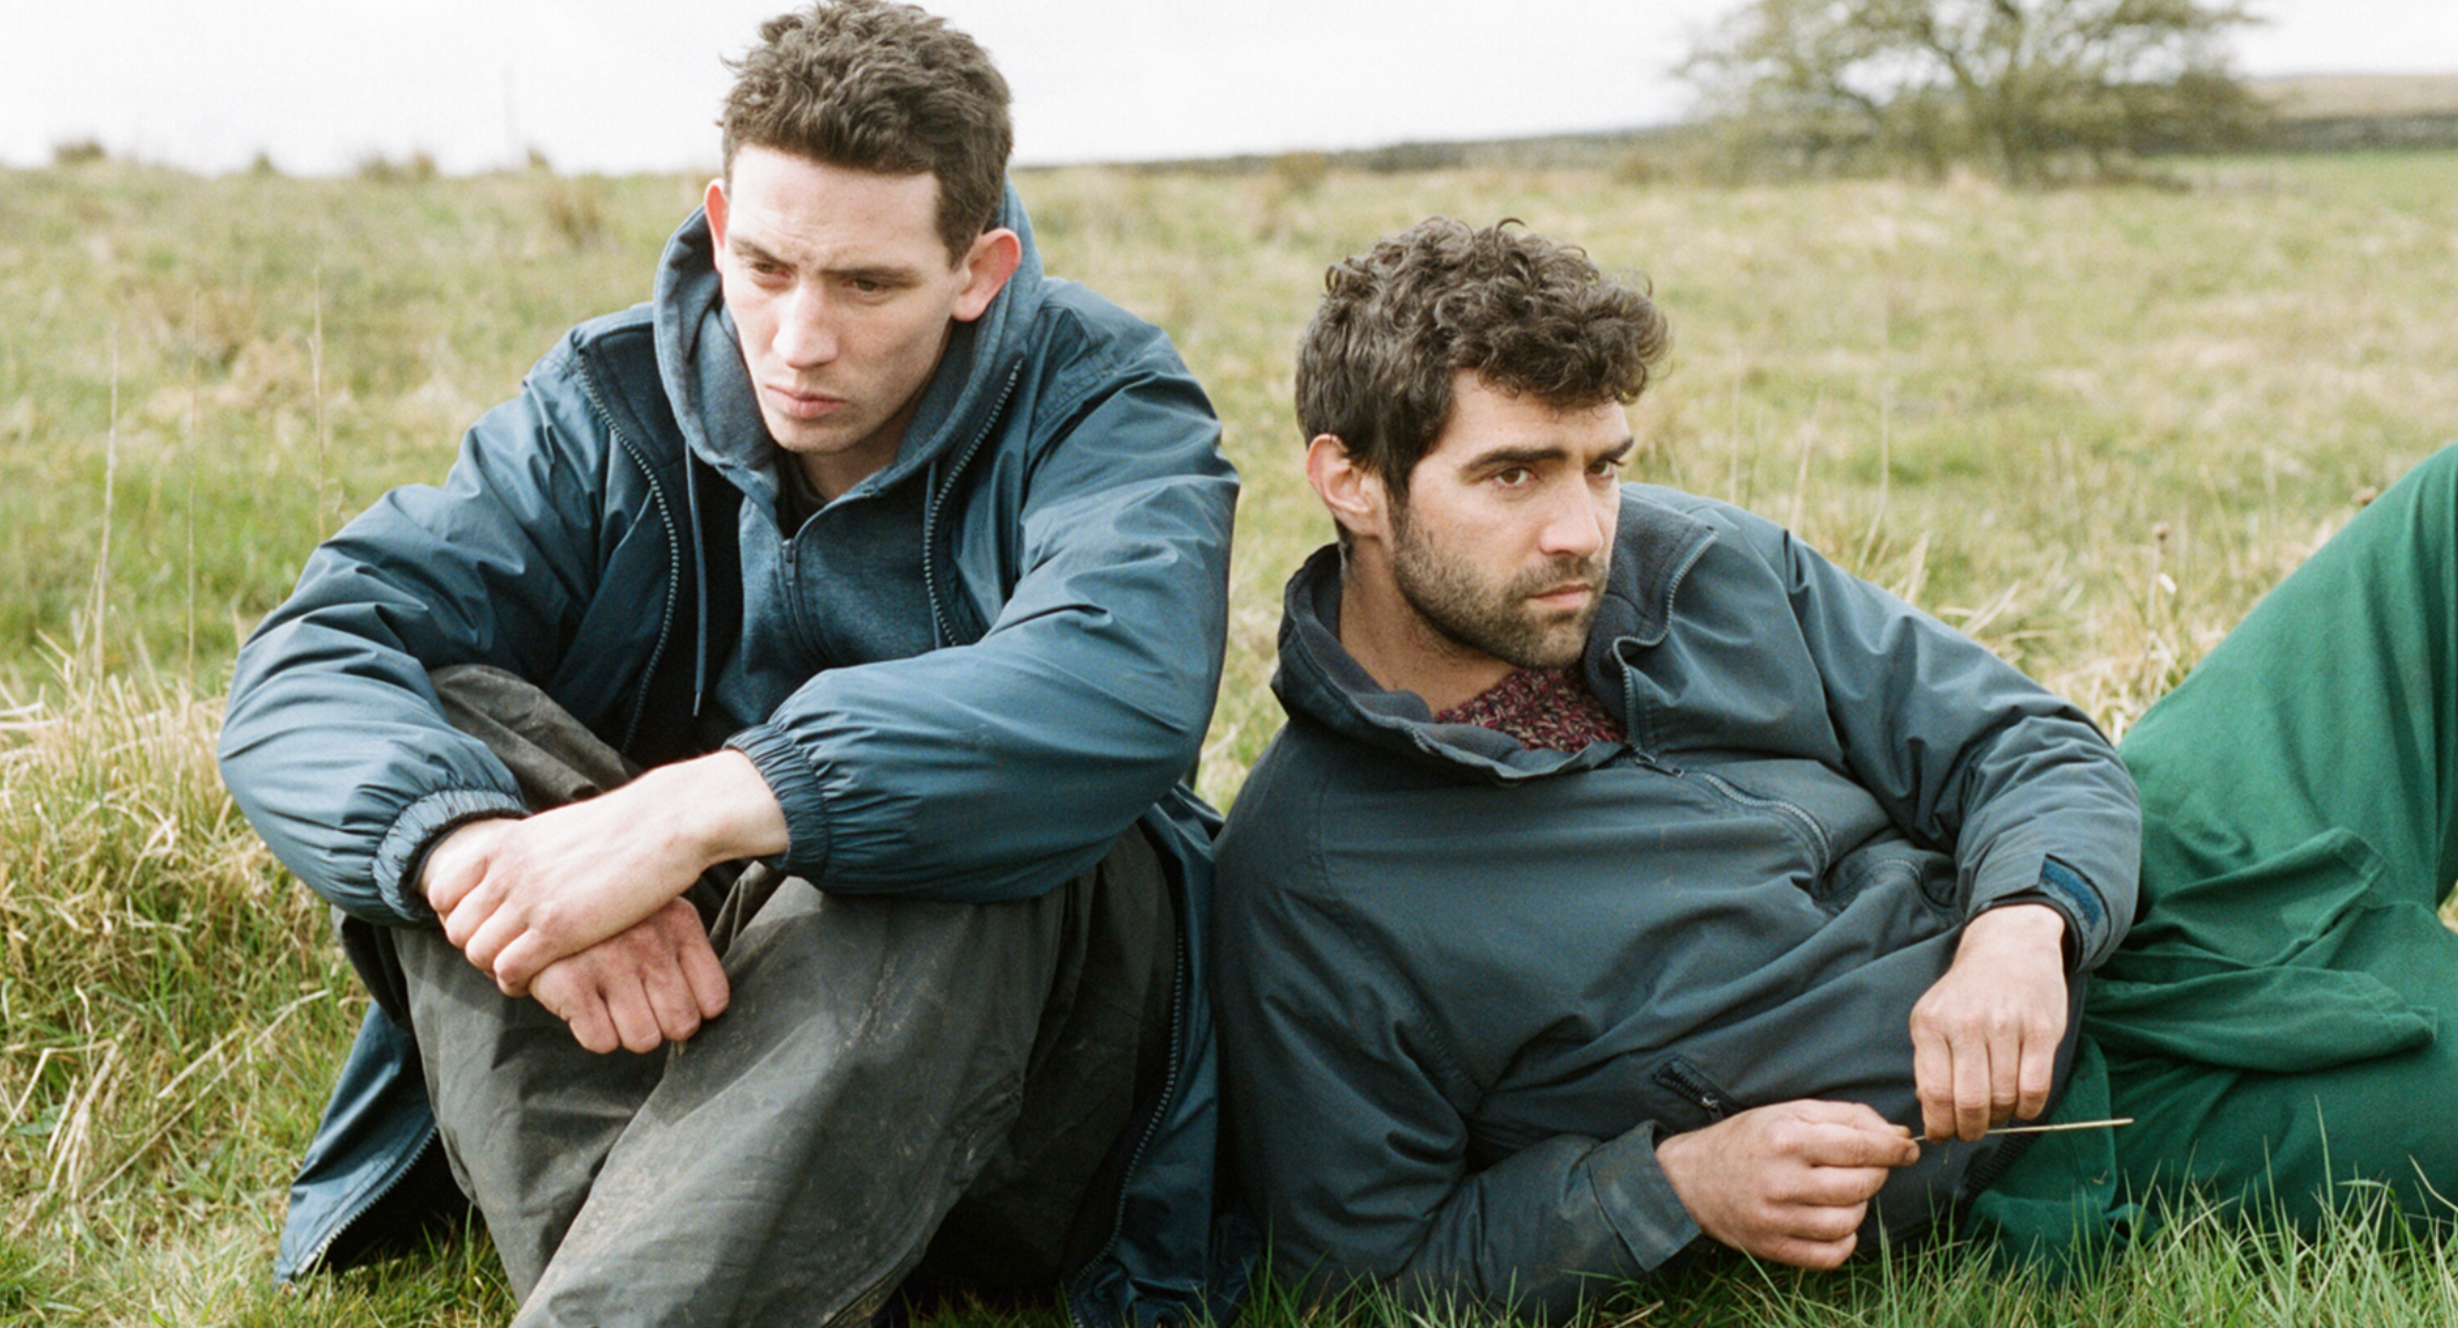 Josh O’Connor as Johnny and Alec Secareanu as Gheorghe in ‘God’s Own Country’